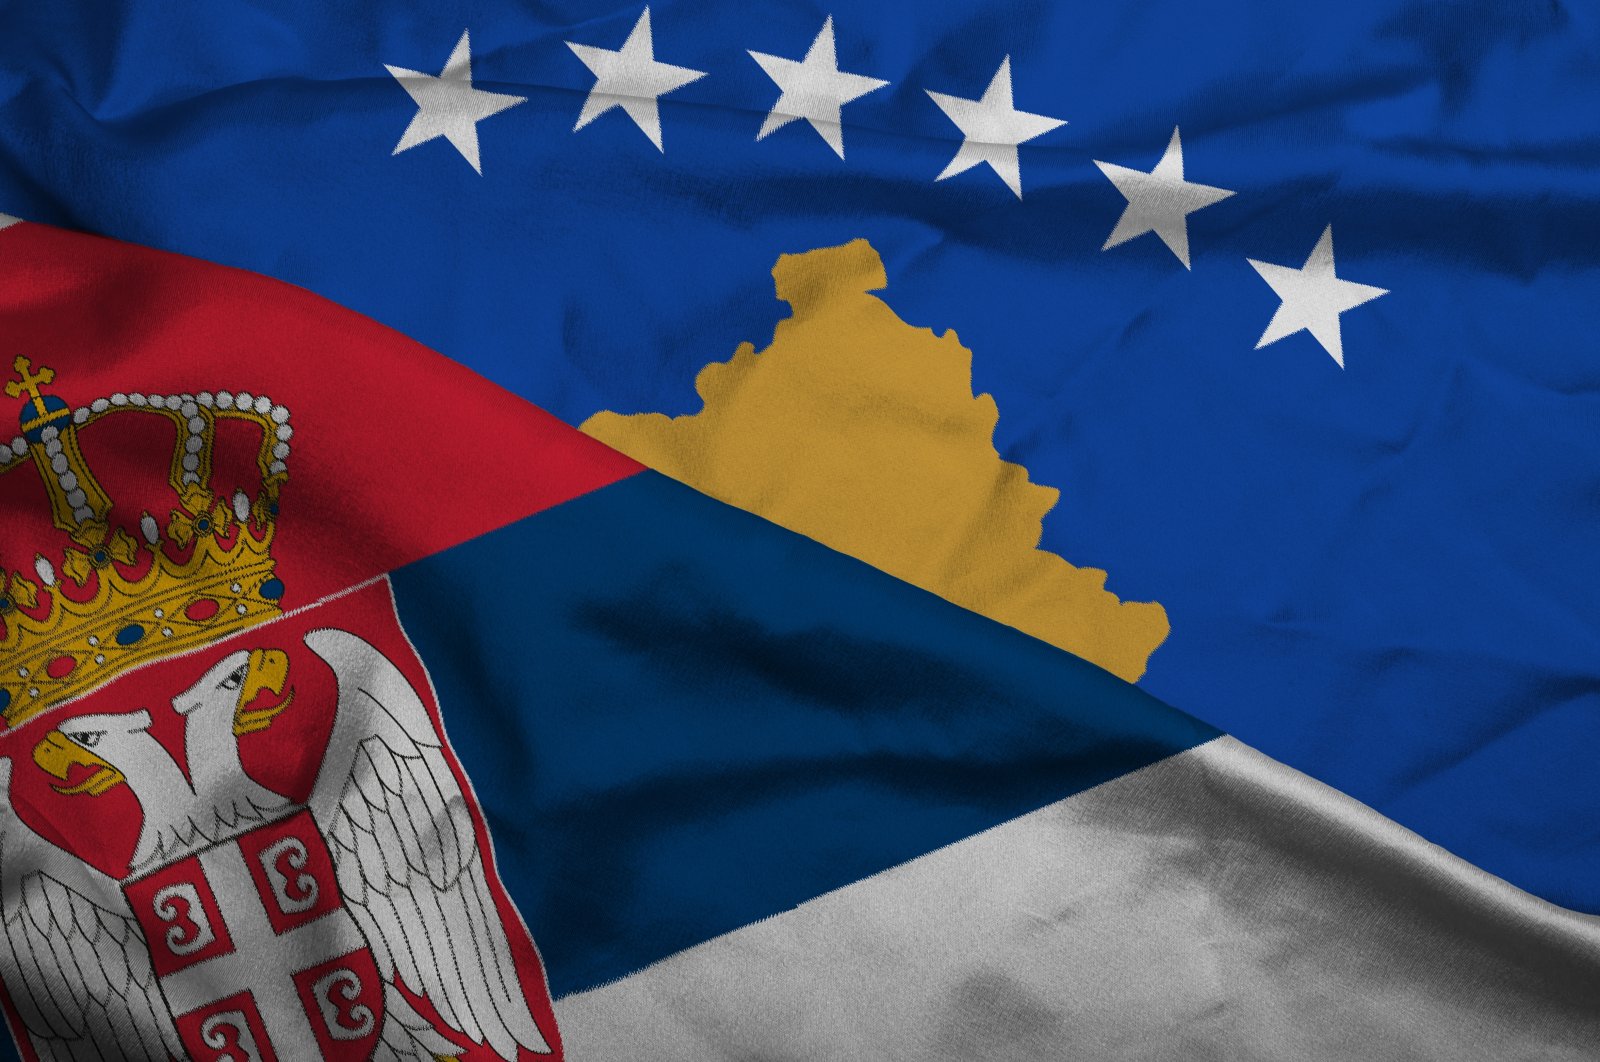 This illustration shows the flags of Serbia and Kosovo.